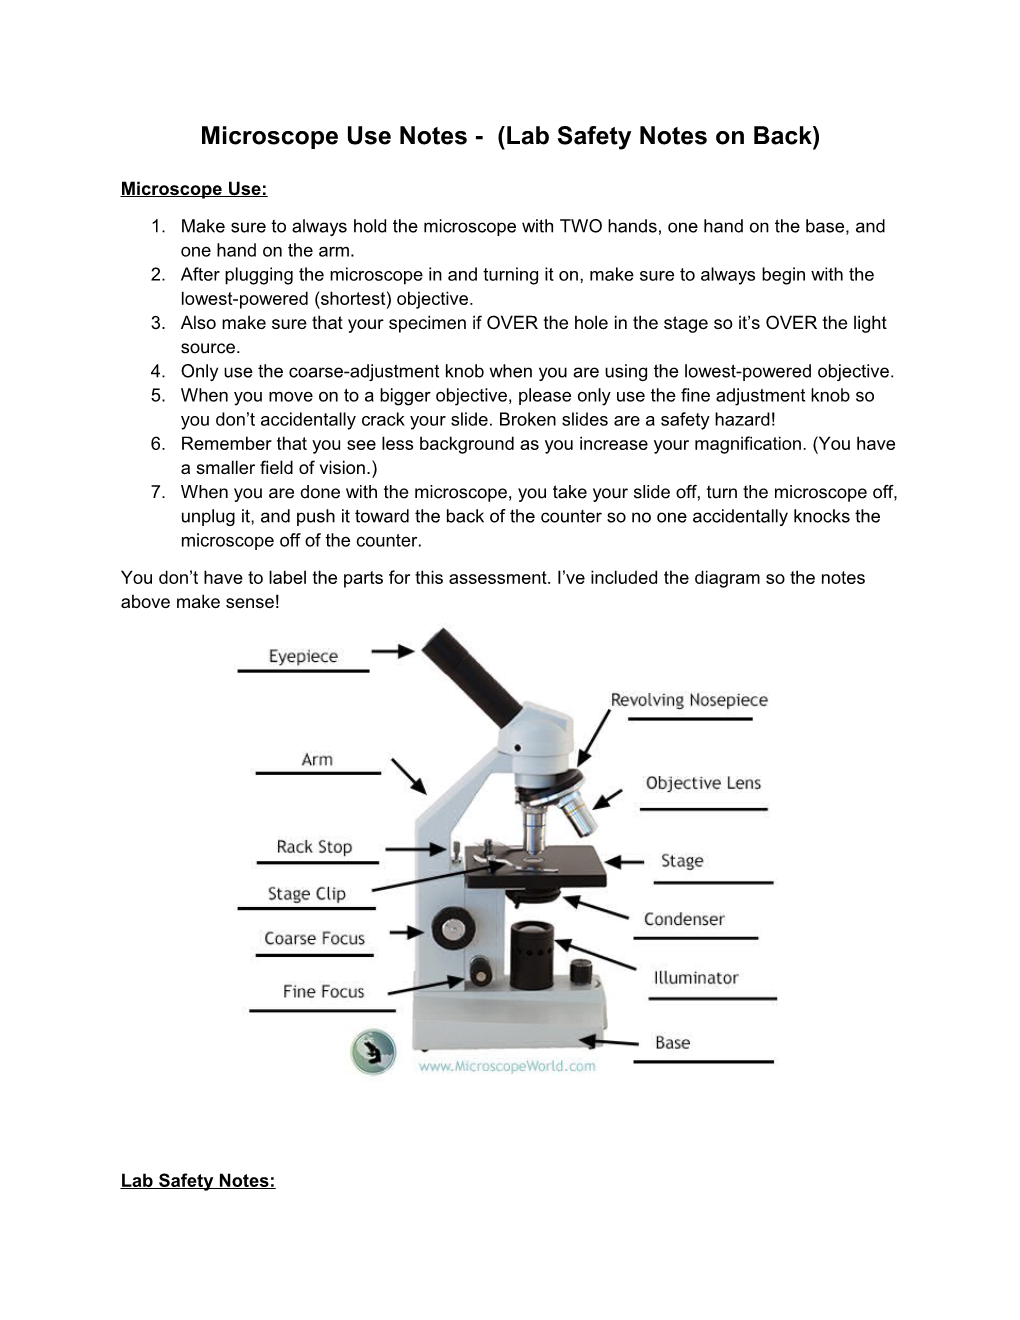 Microscope Use Notes - (Lab Safety Notes on Back)